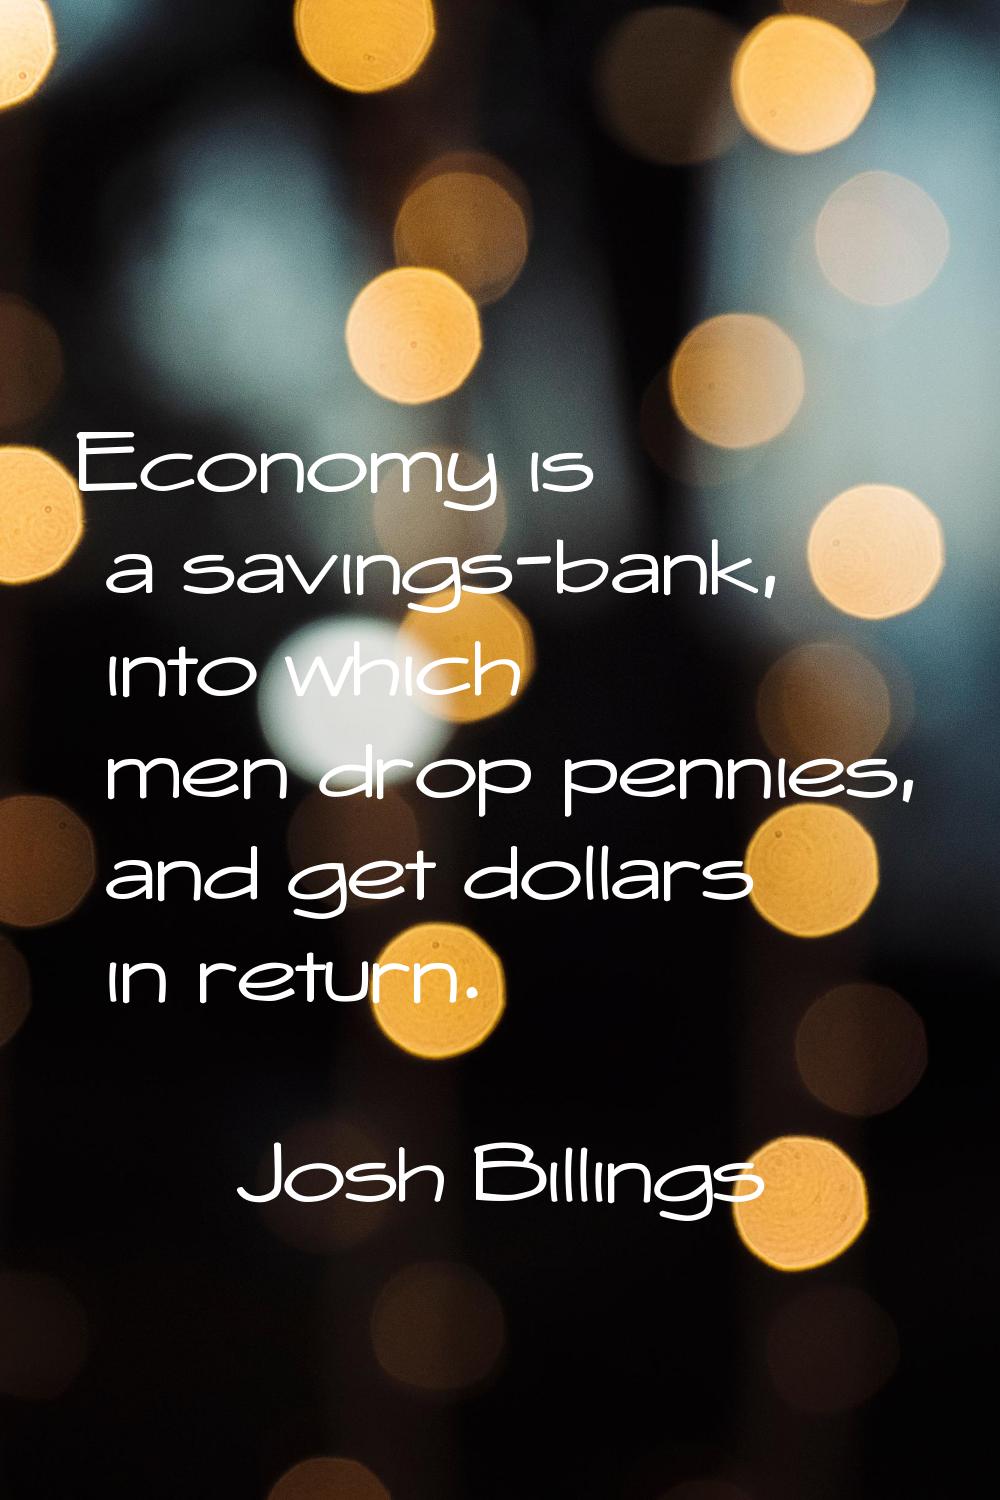 Economy is a savings-bank, into which men drop pennies, and get dollars in return.